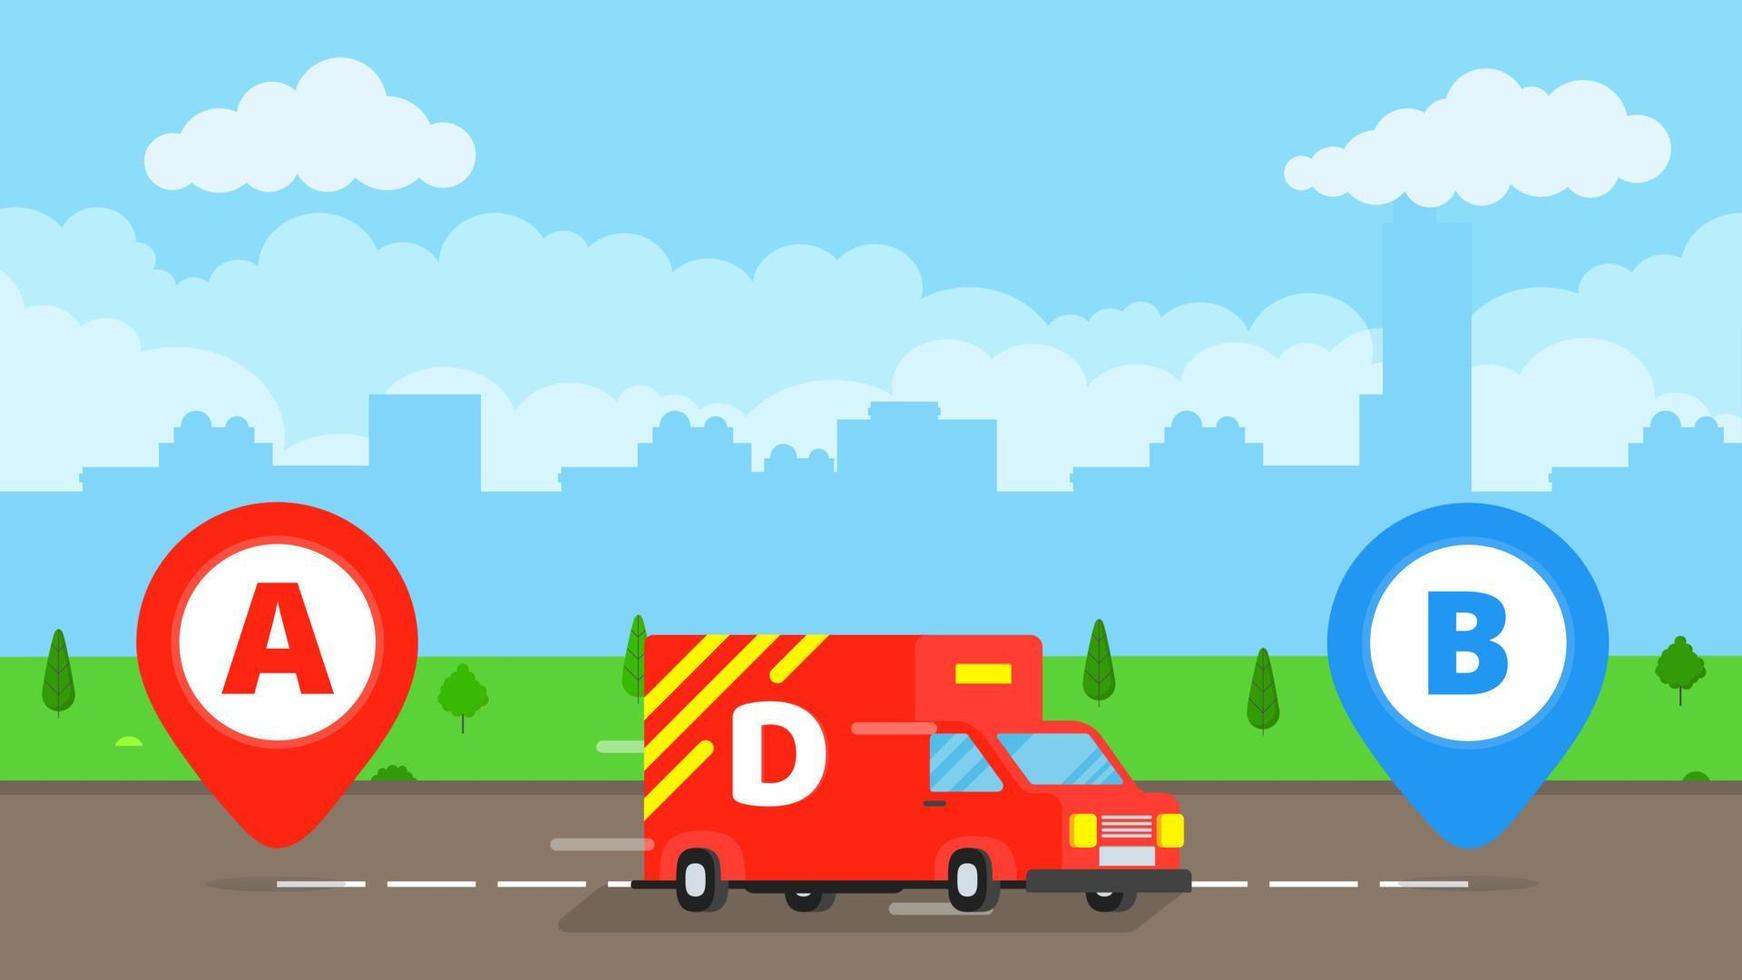 Fast delivery truck service on the road. Car van with landscape behind flat style design and map pins A and B vector illustration isolated on light blue background.  Symbol of delivery company.